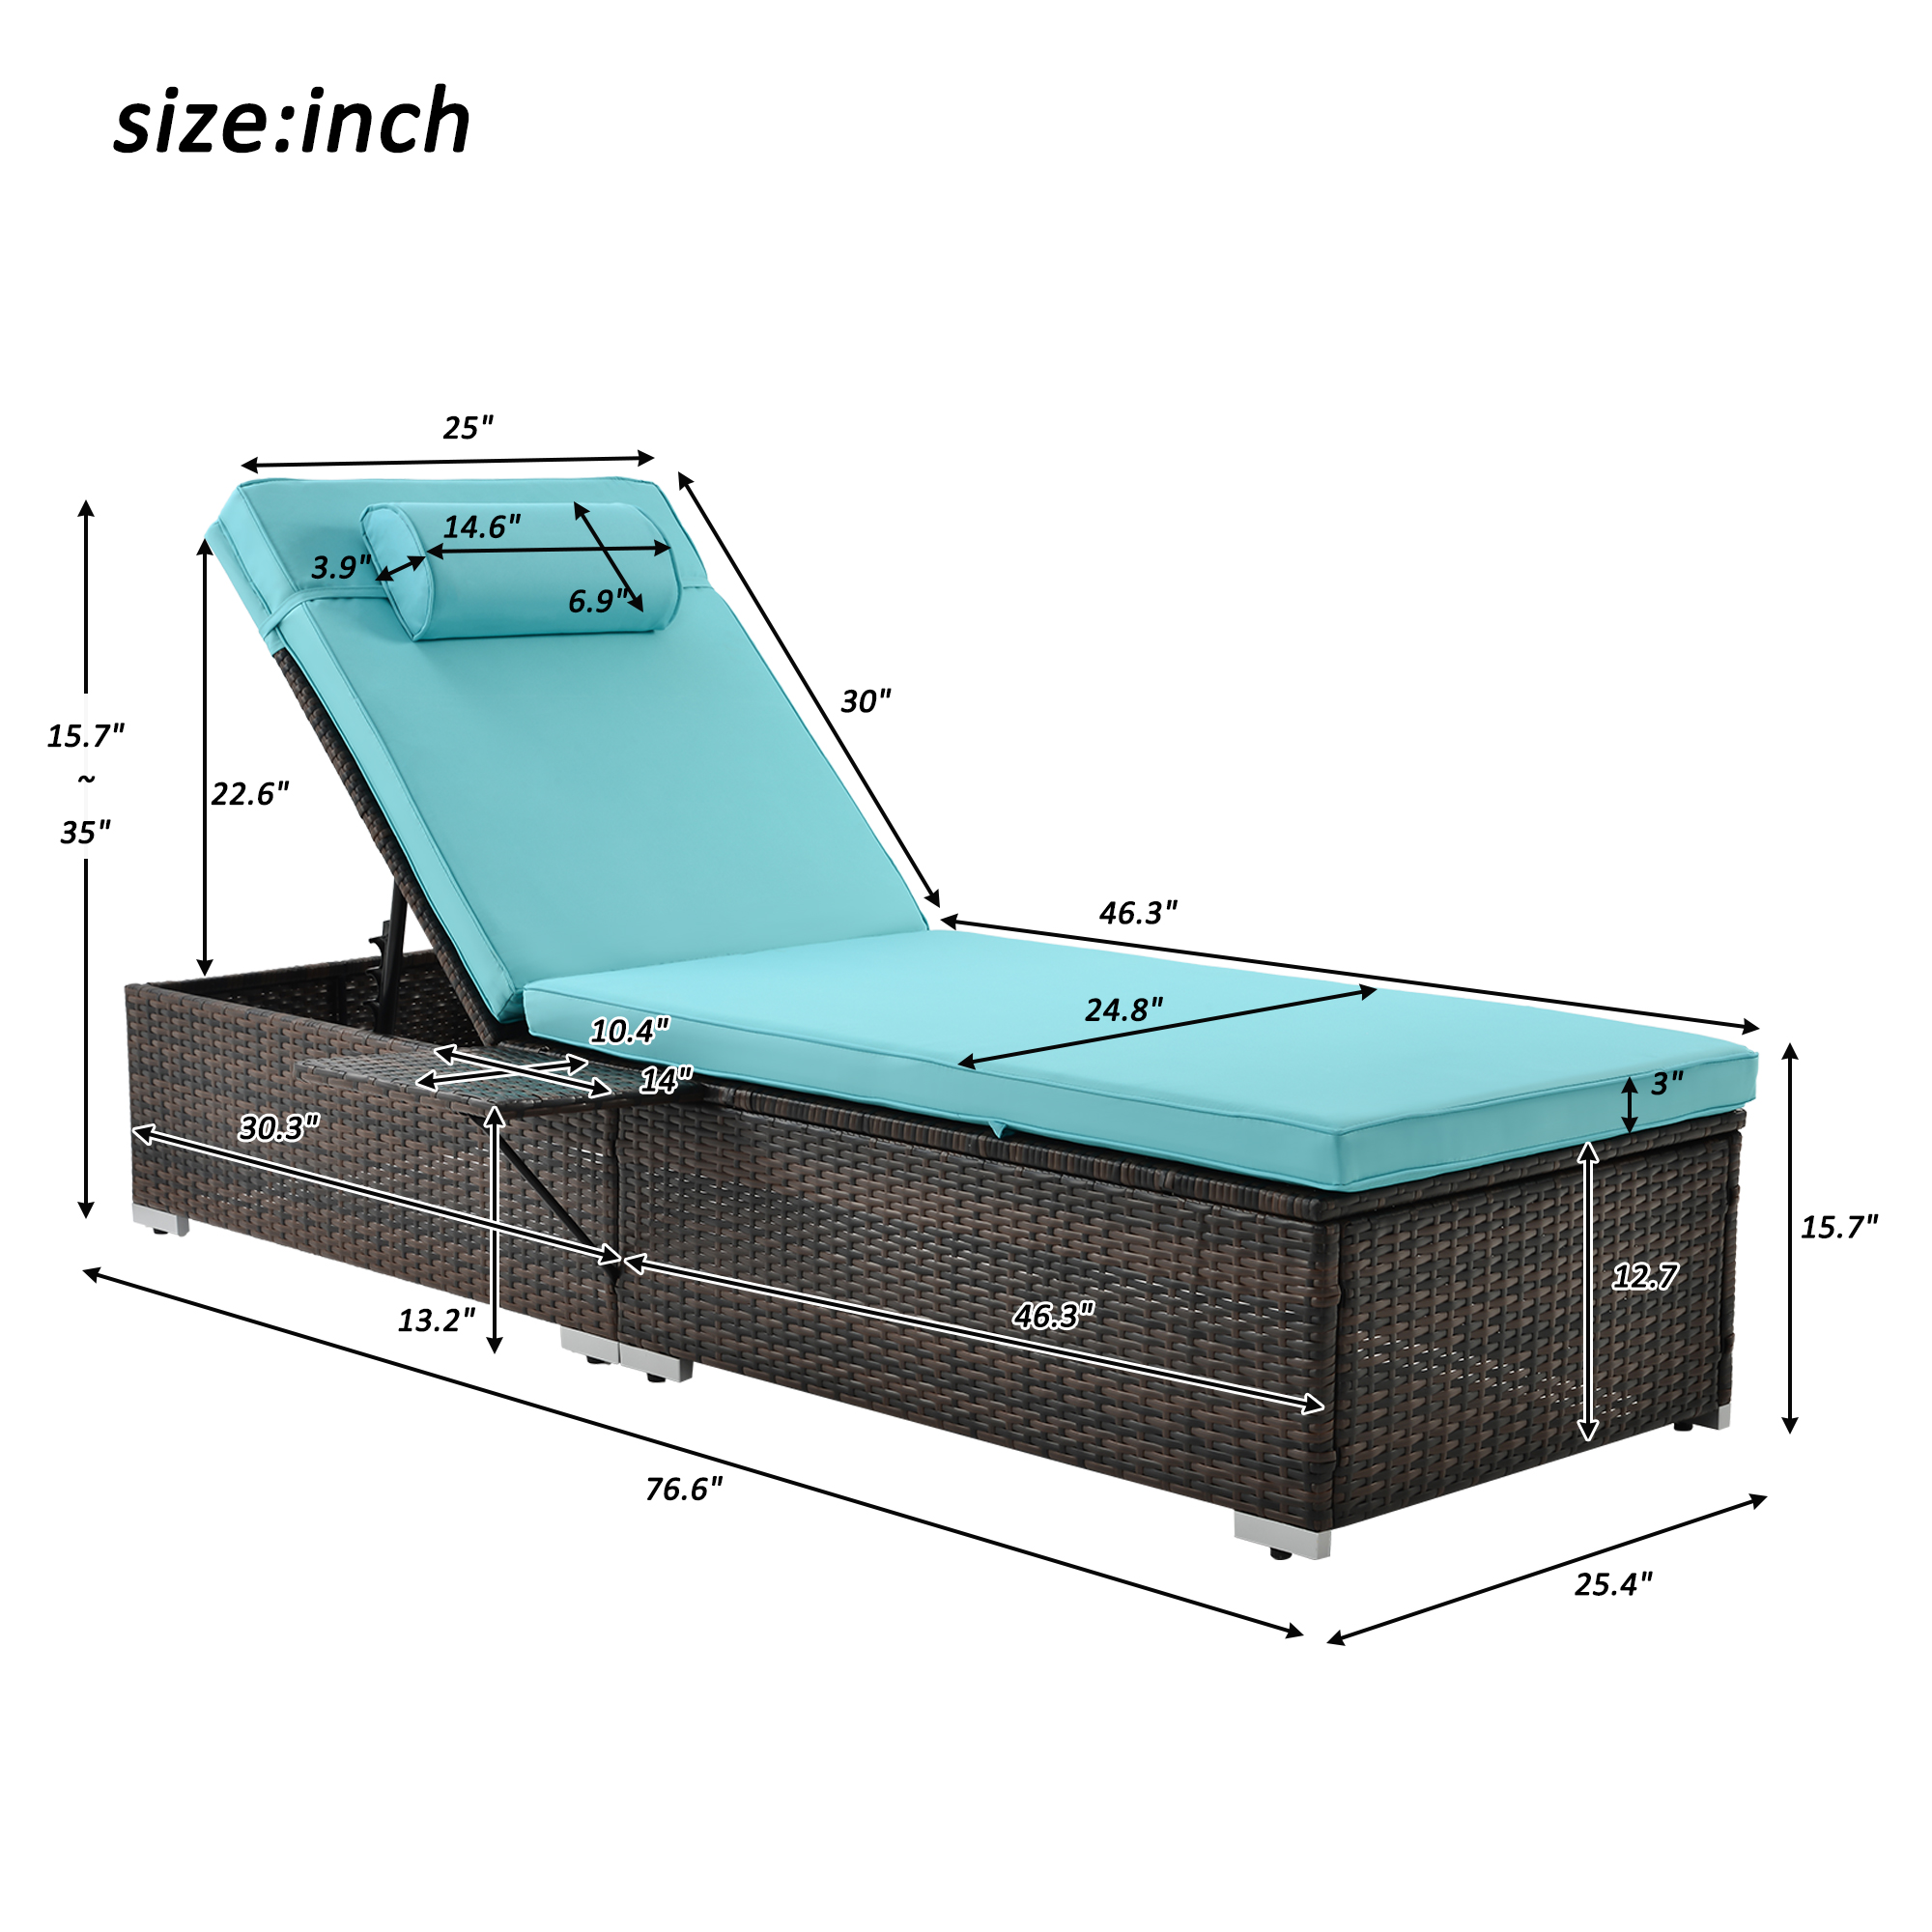 2 Piece Patio Chaise Lounge Furniture Set with Side Table, 5-Position Adjustable Cushioned Rattan Chaise Lounge with Head Pillow, PE Rattan Backrest Lounge Chairs Set for Pool Balcony Deck Yard, B68 - image 5 of 11